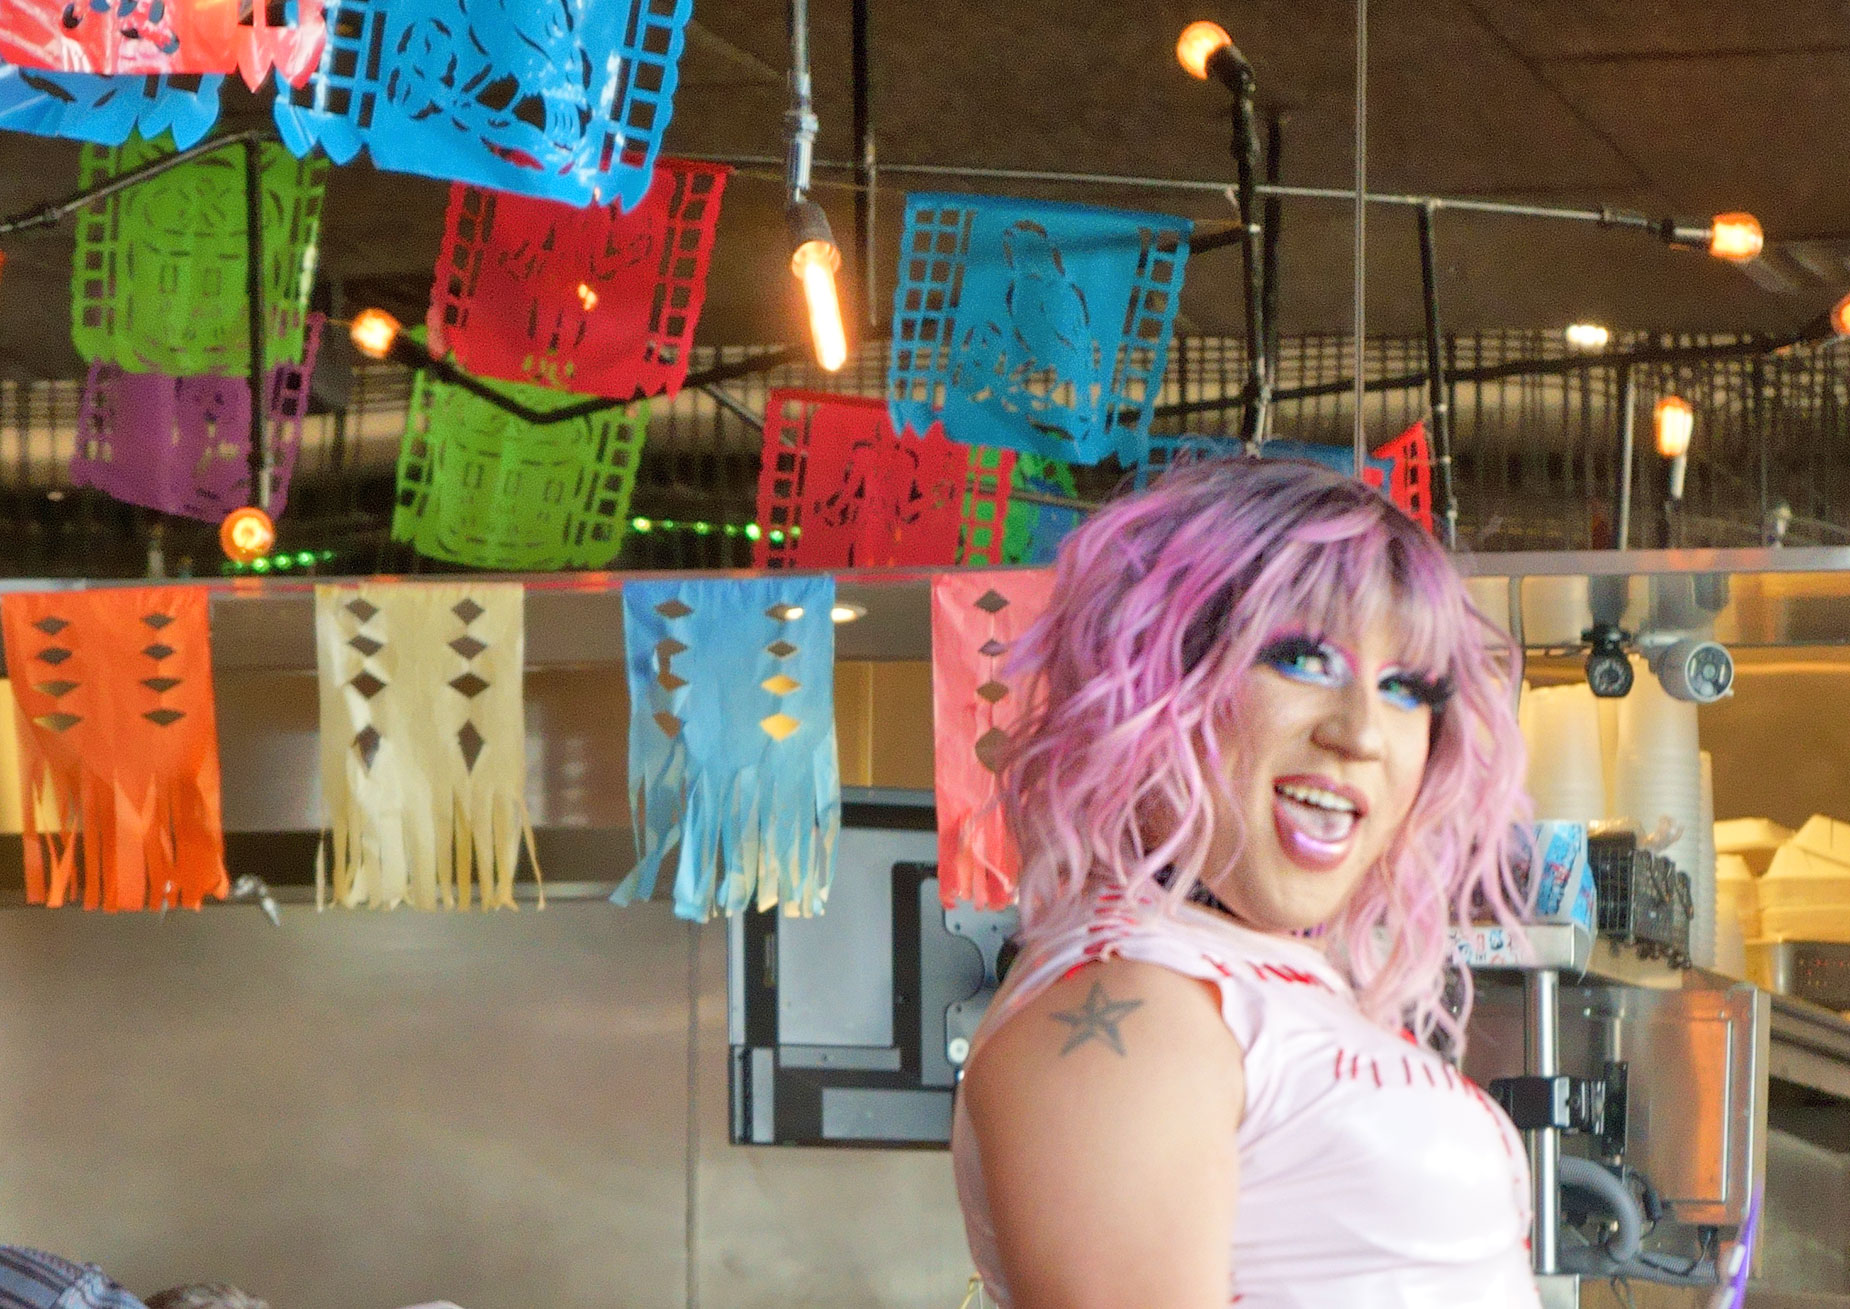 Texas drag queen Emeka Bless at TNT Tacos and Tequila drag brunch